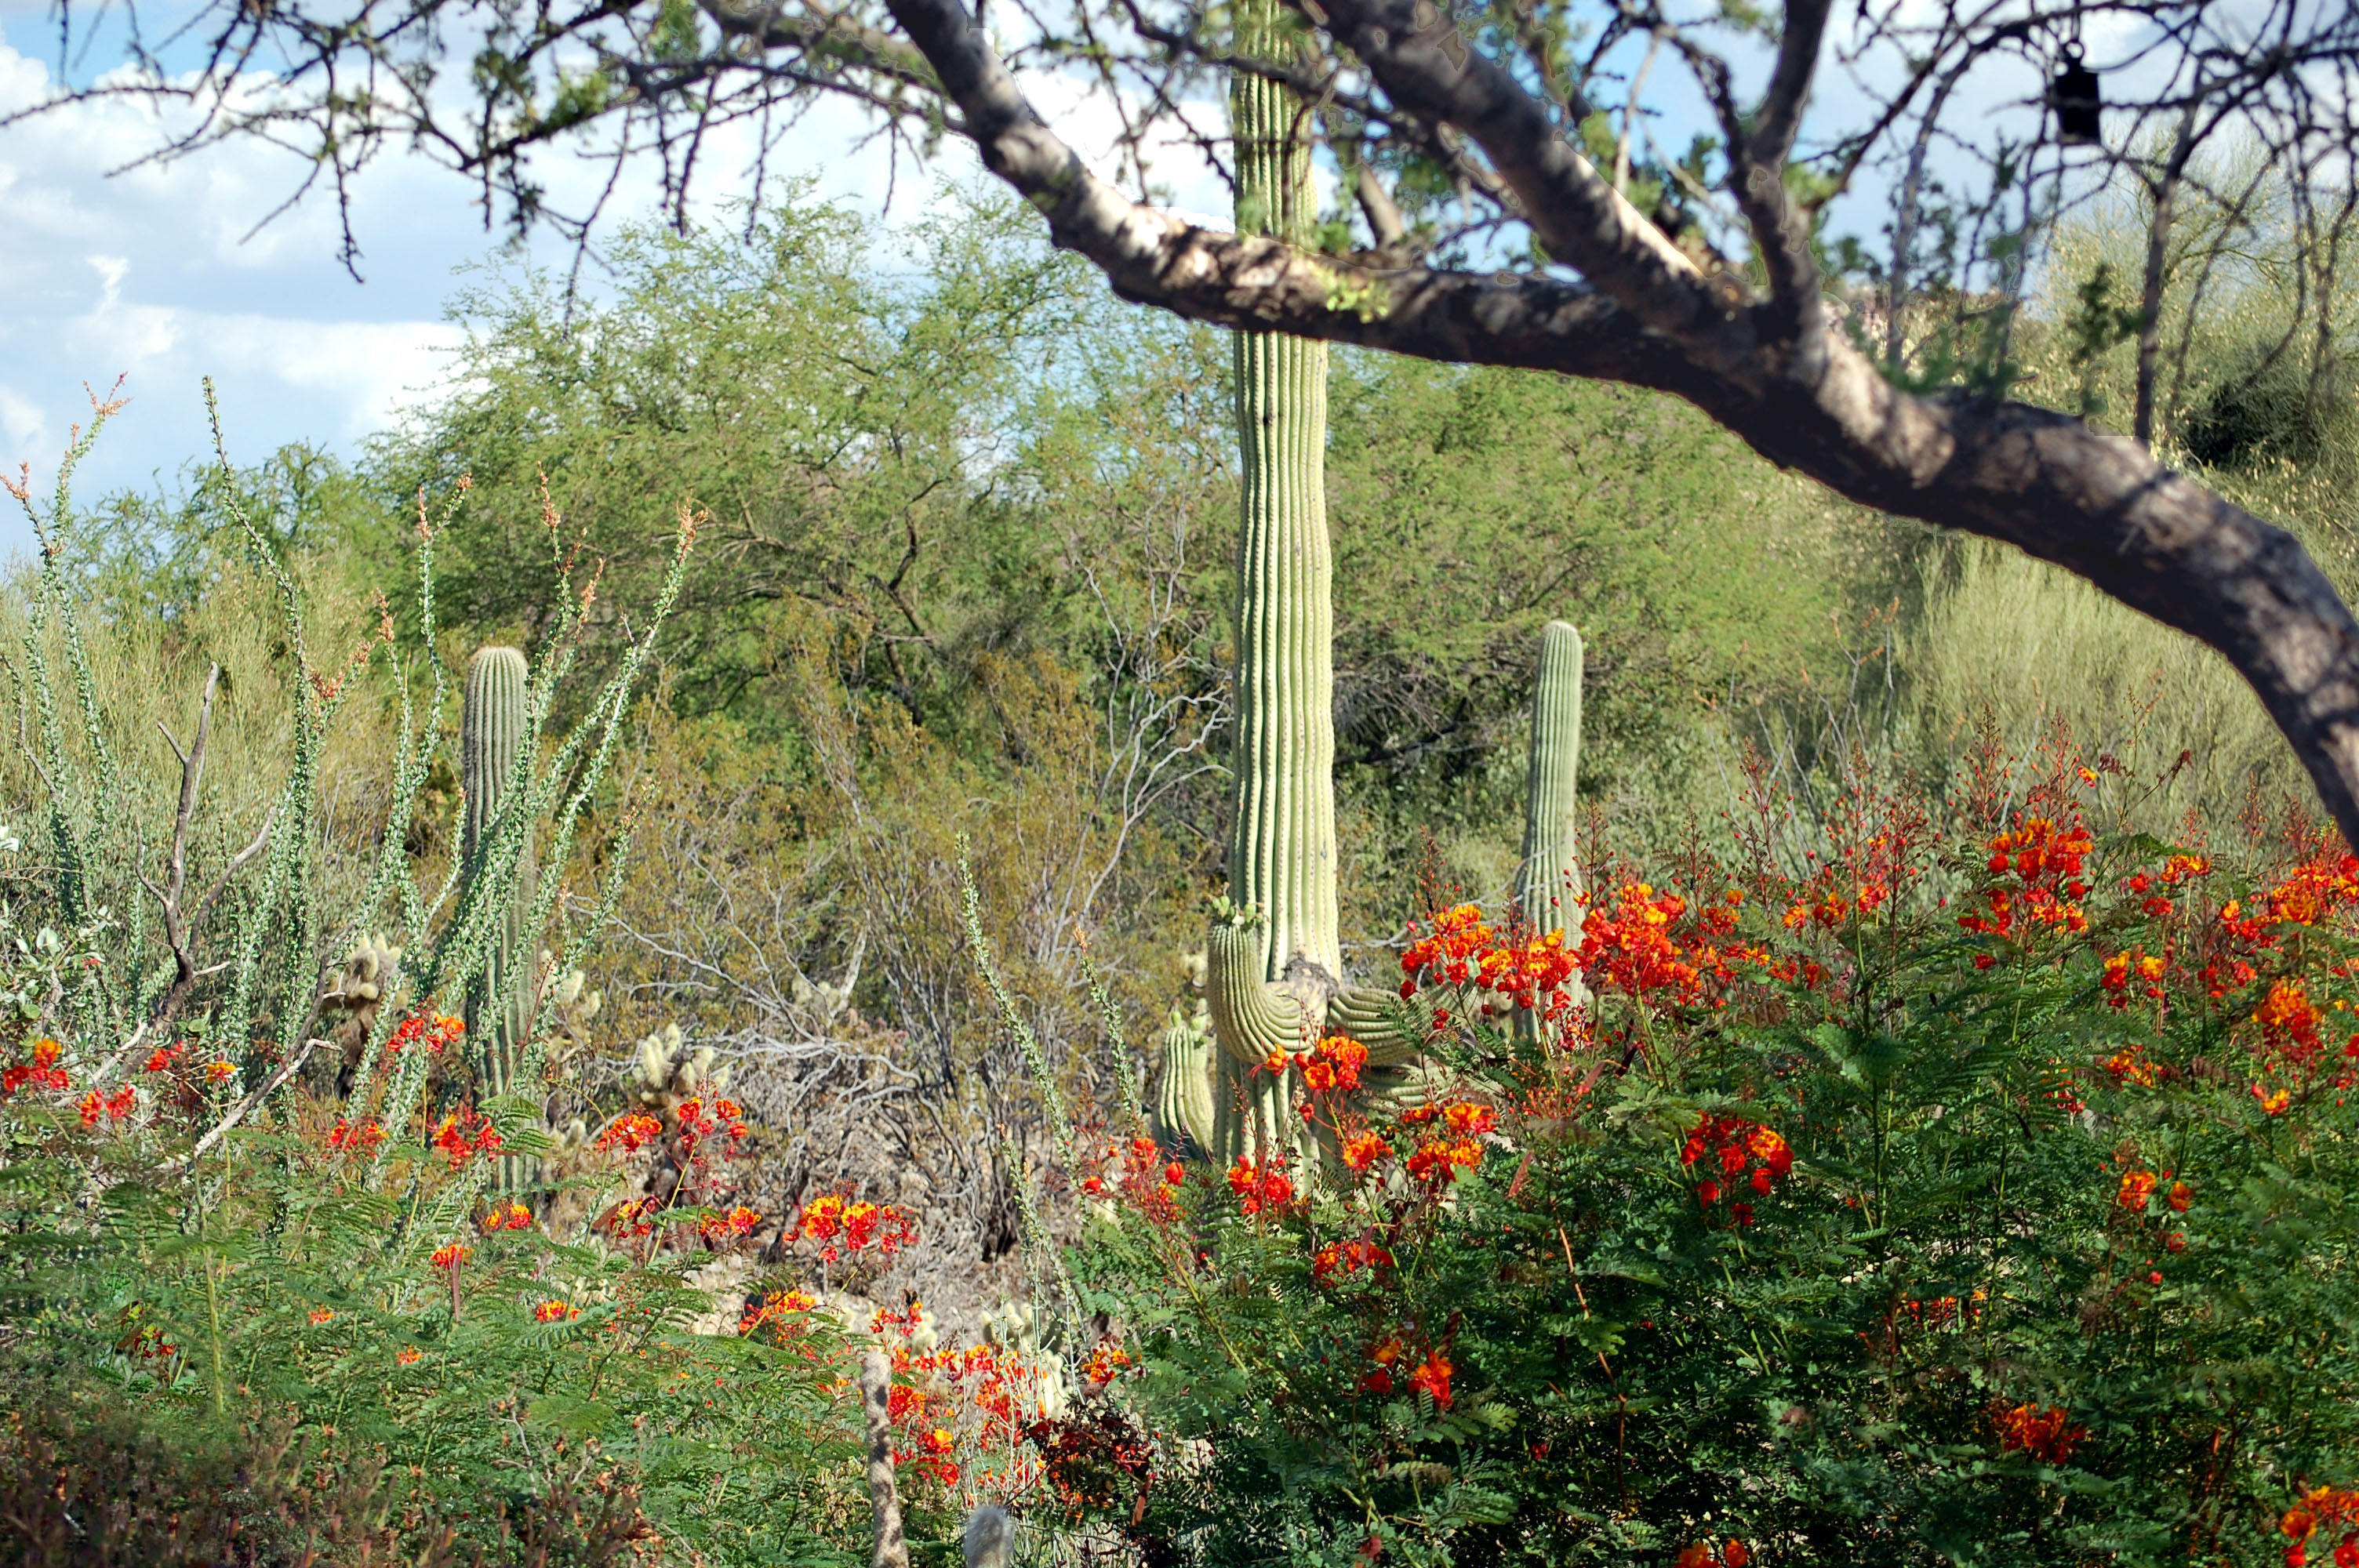 Photo of the desert with colorful flowers and cacti